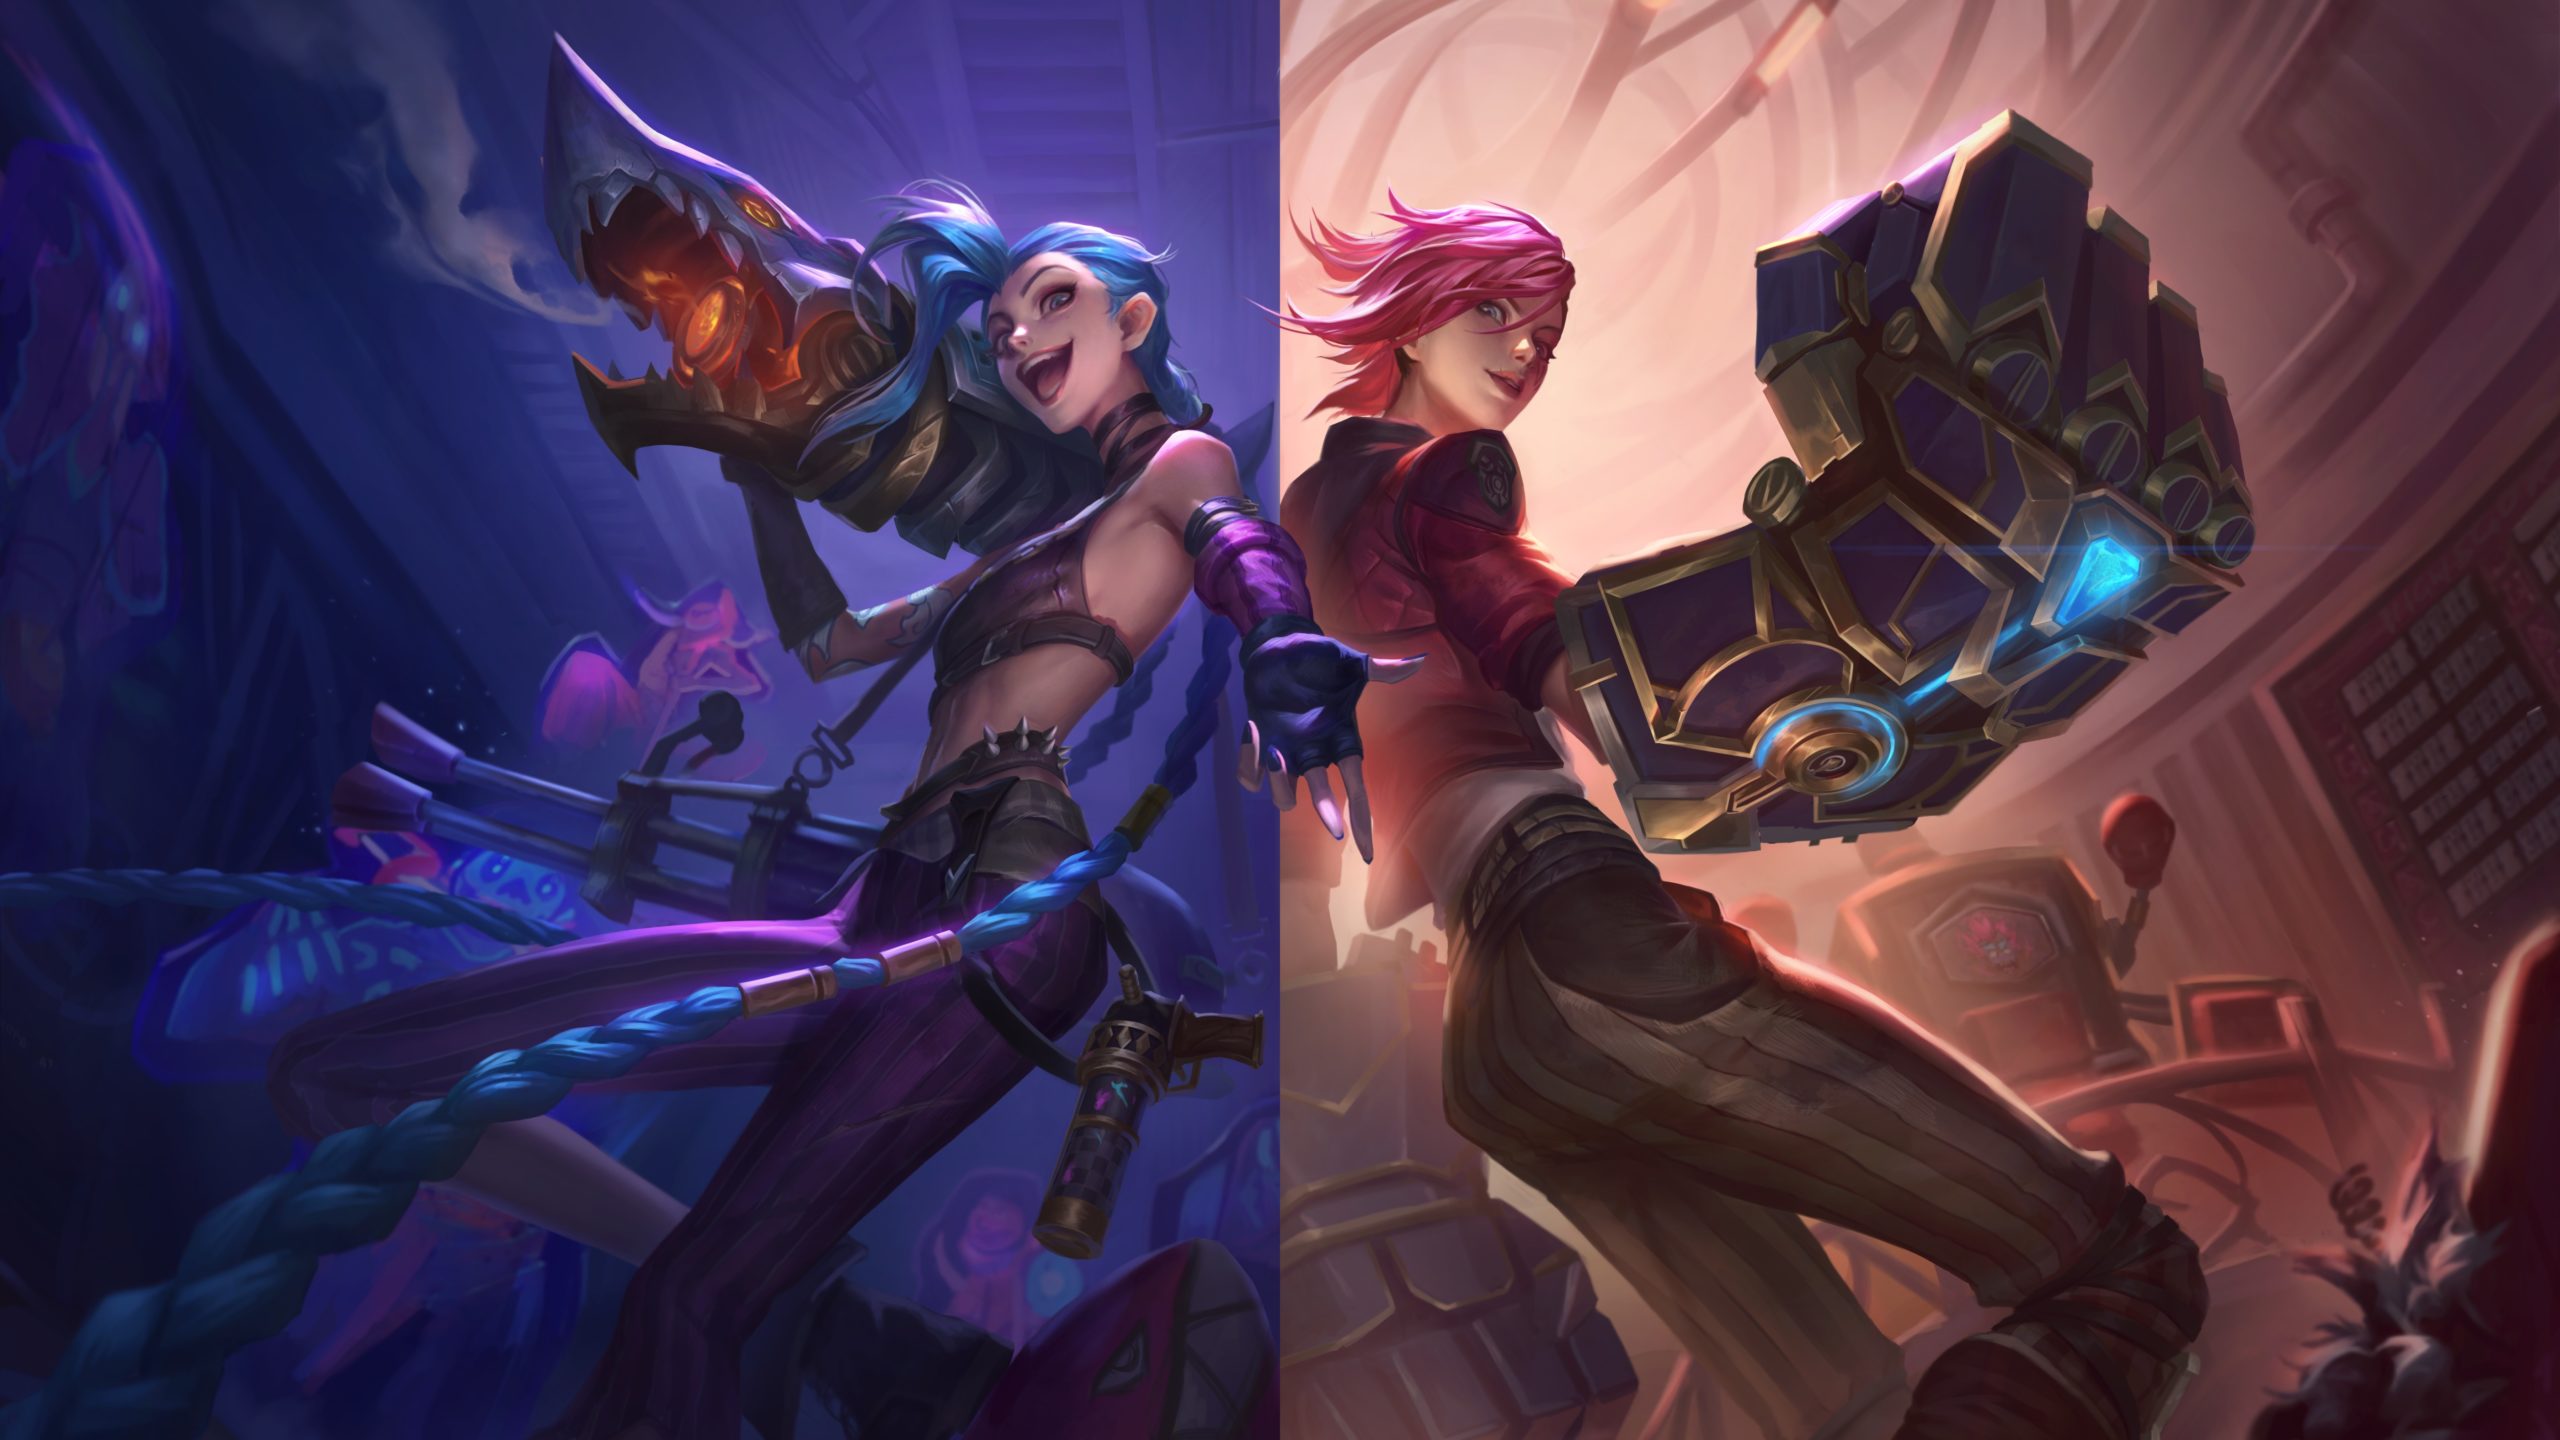 How to get Arcane Jinx and Vi skins in Wild Rift - Dot Esports